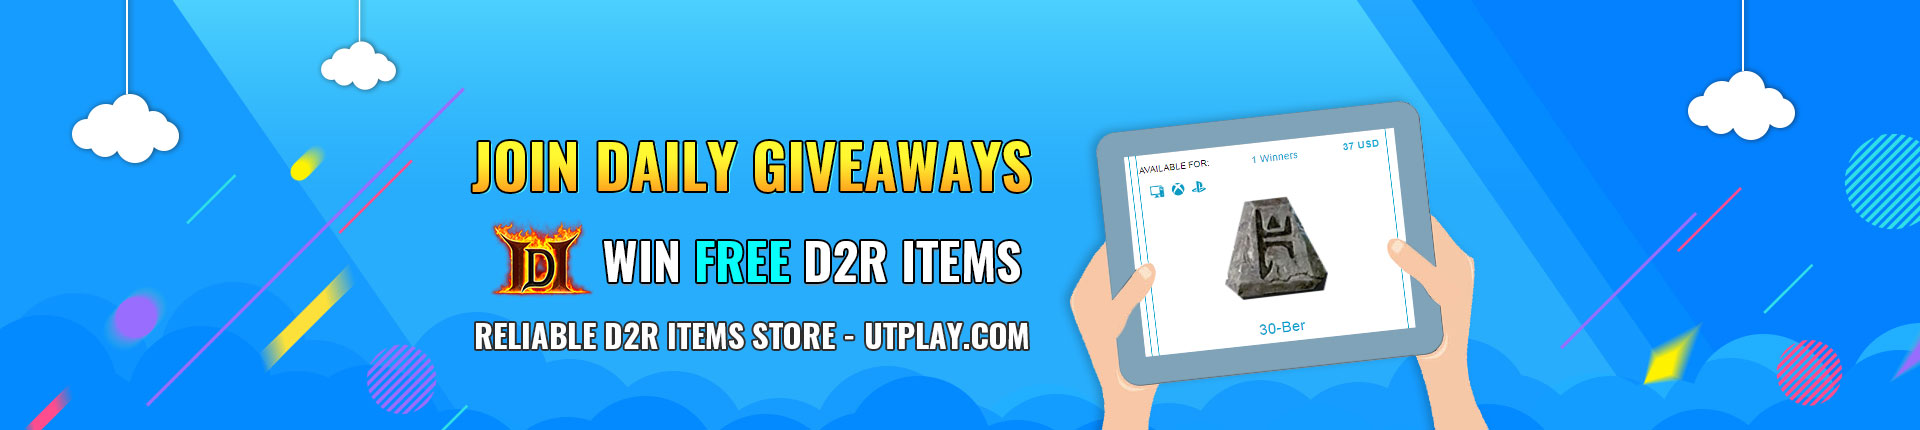 D2R Giveaway & Free Diablo 2 Items Everyday